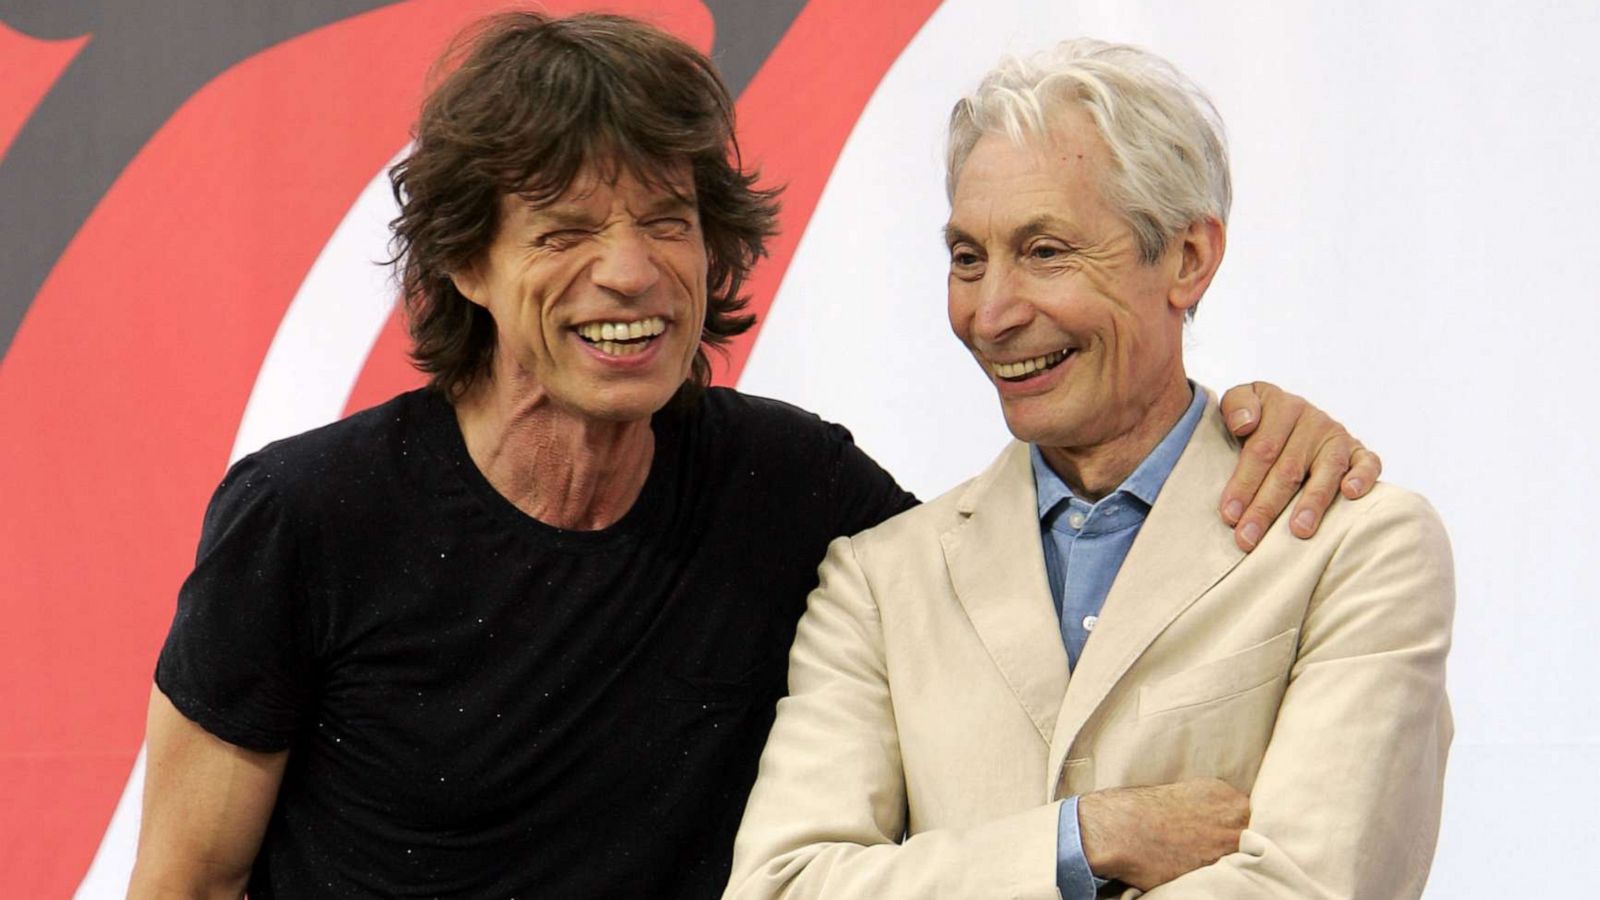 PHOTO: Mick Jagger, left, and Charlie Watts of The Rolling Stones talk to reporters during a press conference to announce a world tour at the Julliard Music School May 10, 2005, in New York City.